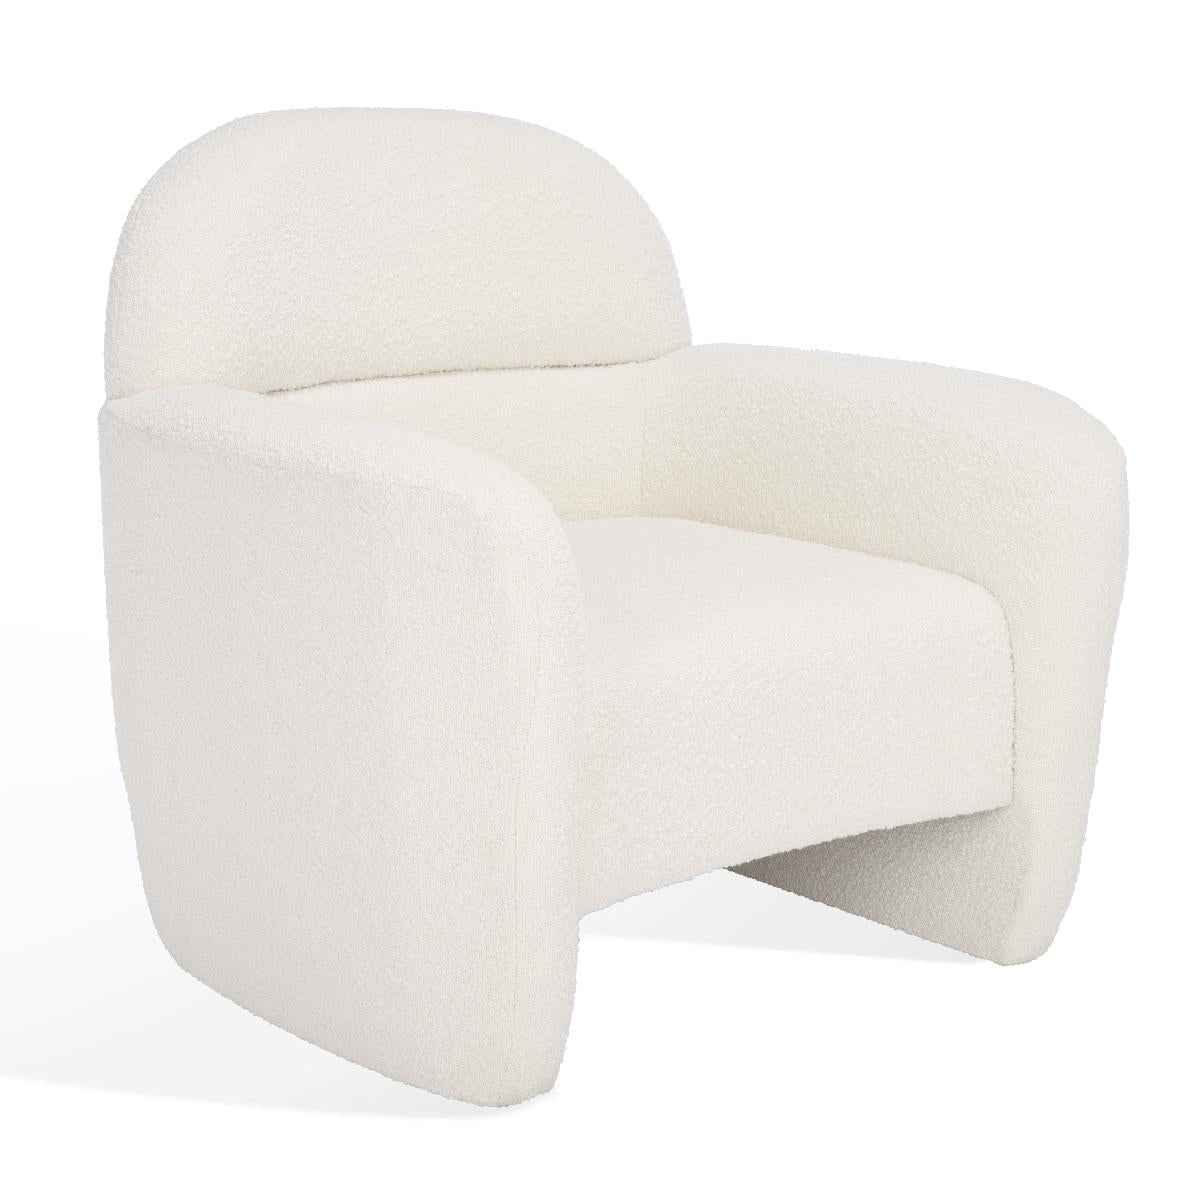 Safavieh Couture Bellamaria Boucle Accent Chair - Ivory